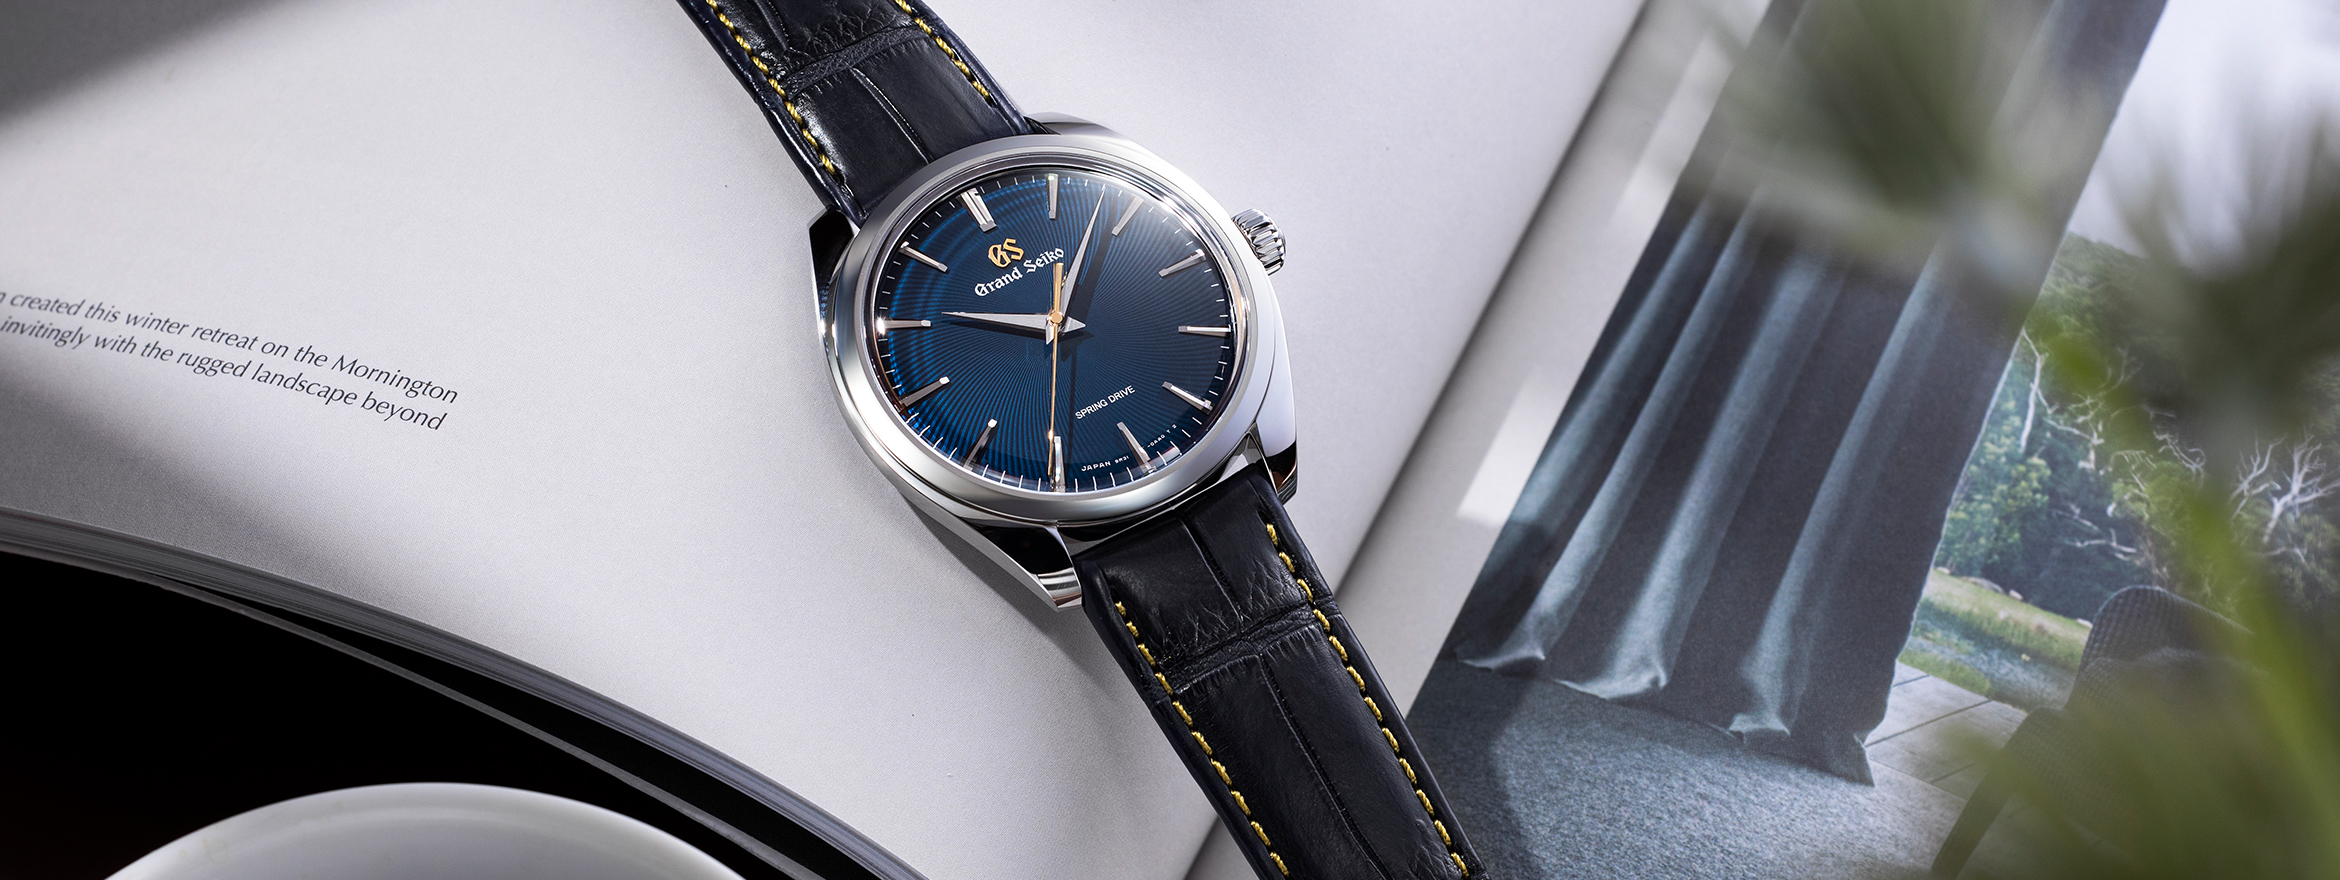 Grand Seiko's Latest is Inspired by the Starry Sky of Shinshu